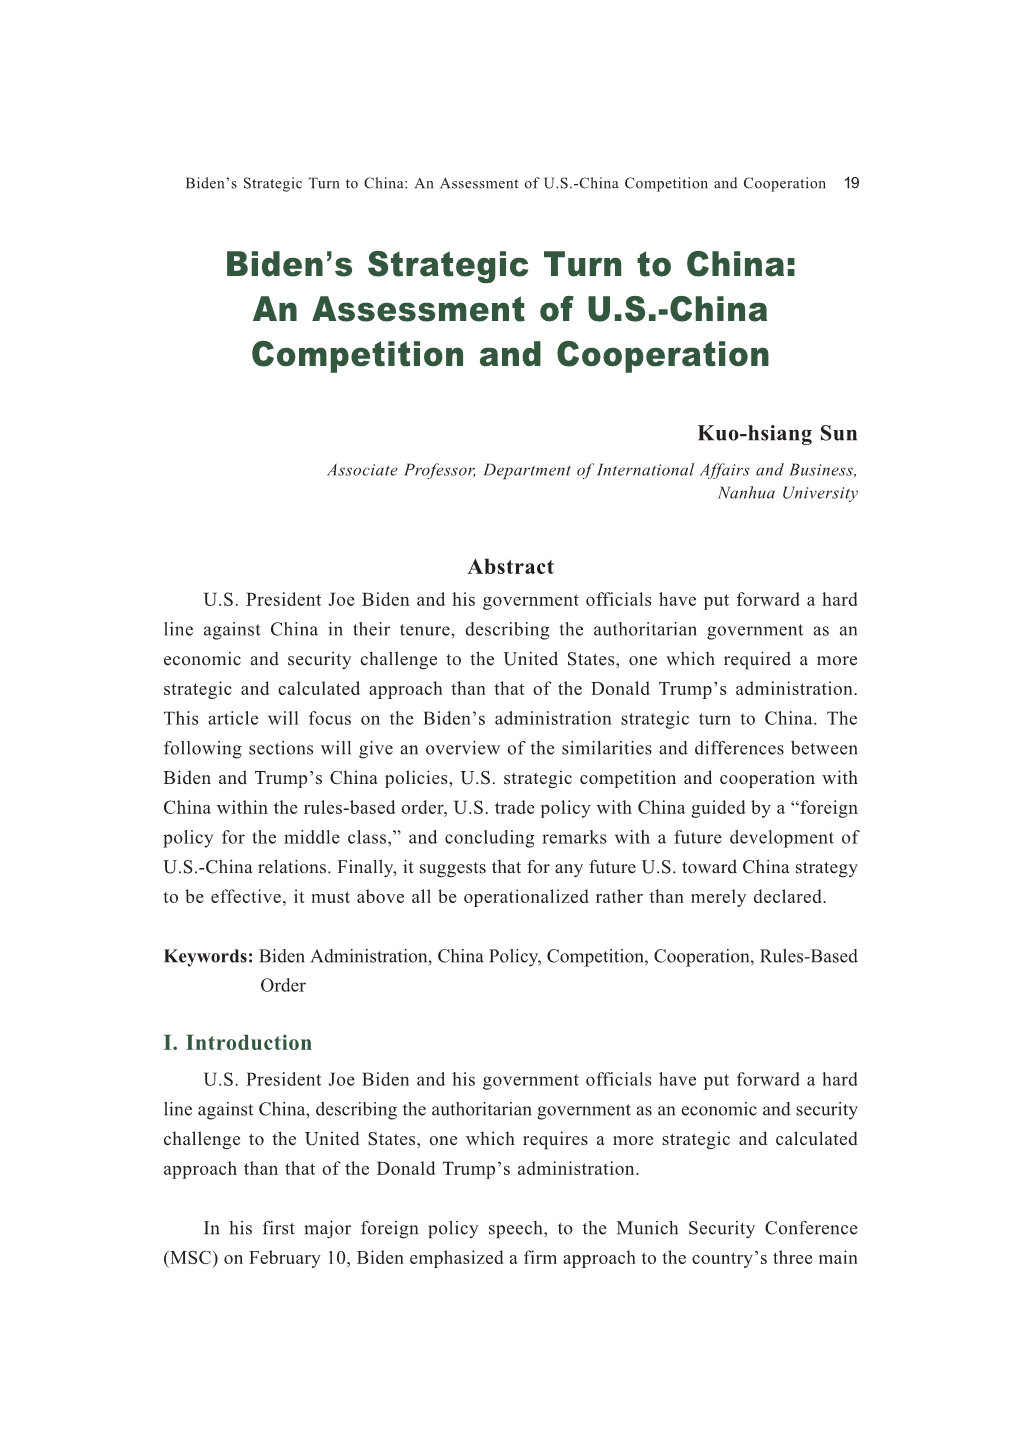 Biden's Strategic Turn to China: an Assessment of U.S.-China Competition and Cooperation